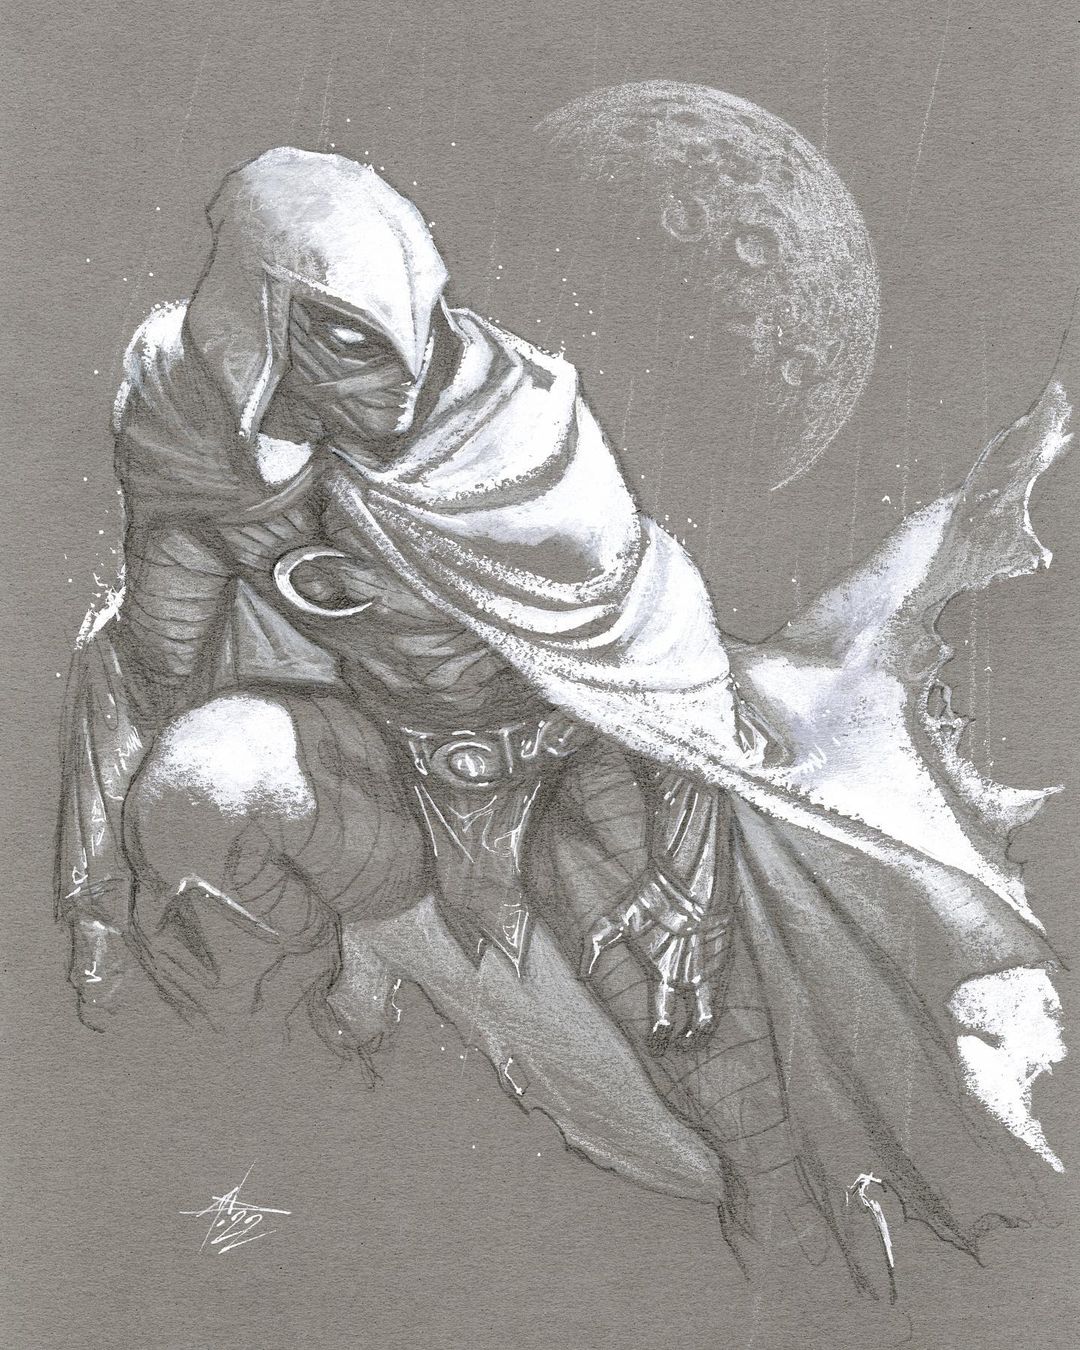 Another MoonKnight Gray